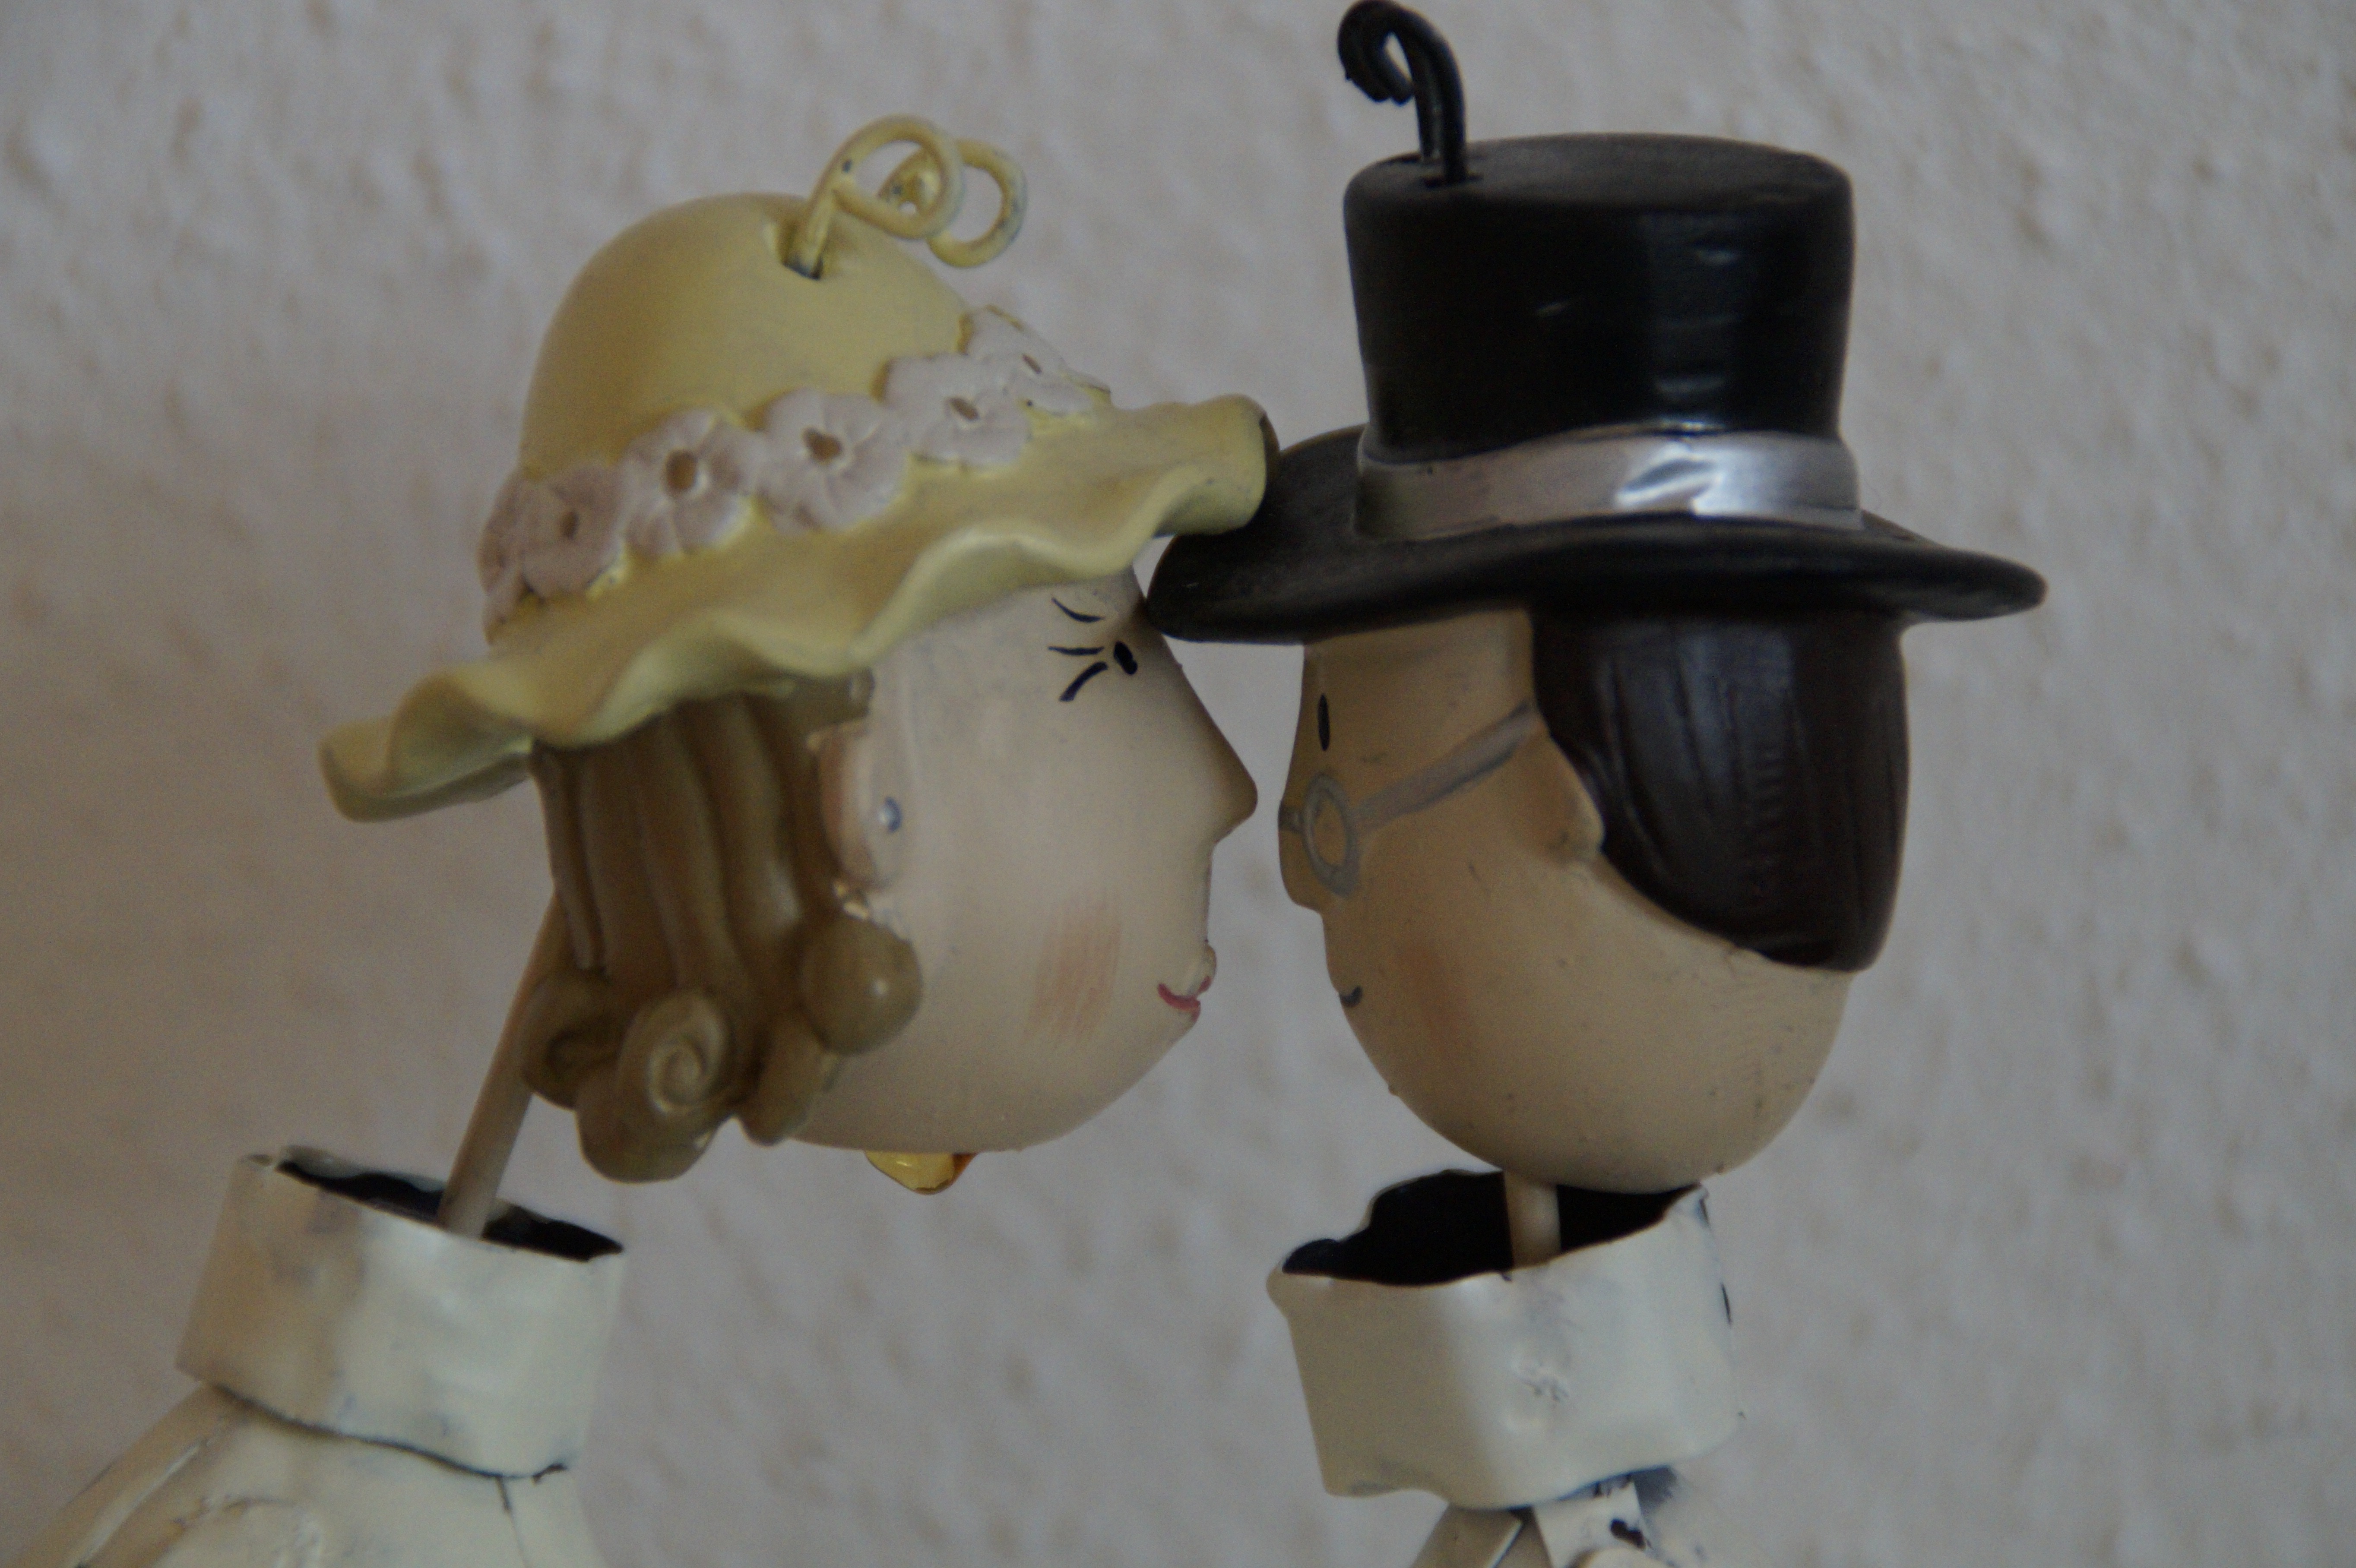 woman in white dress and man in white shirt figurine